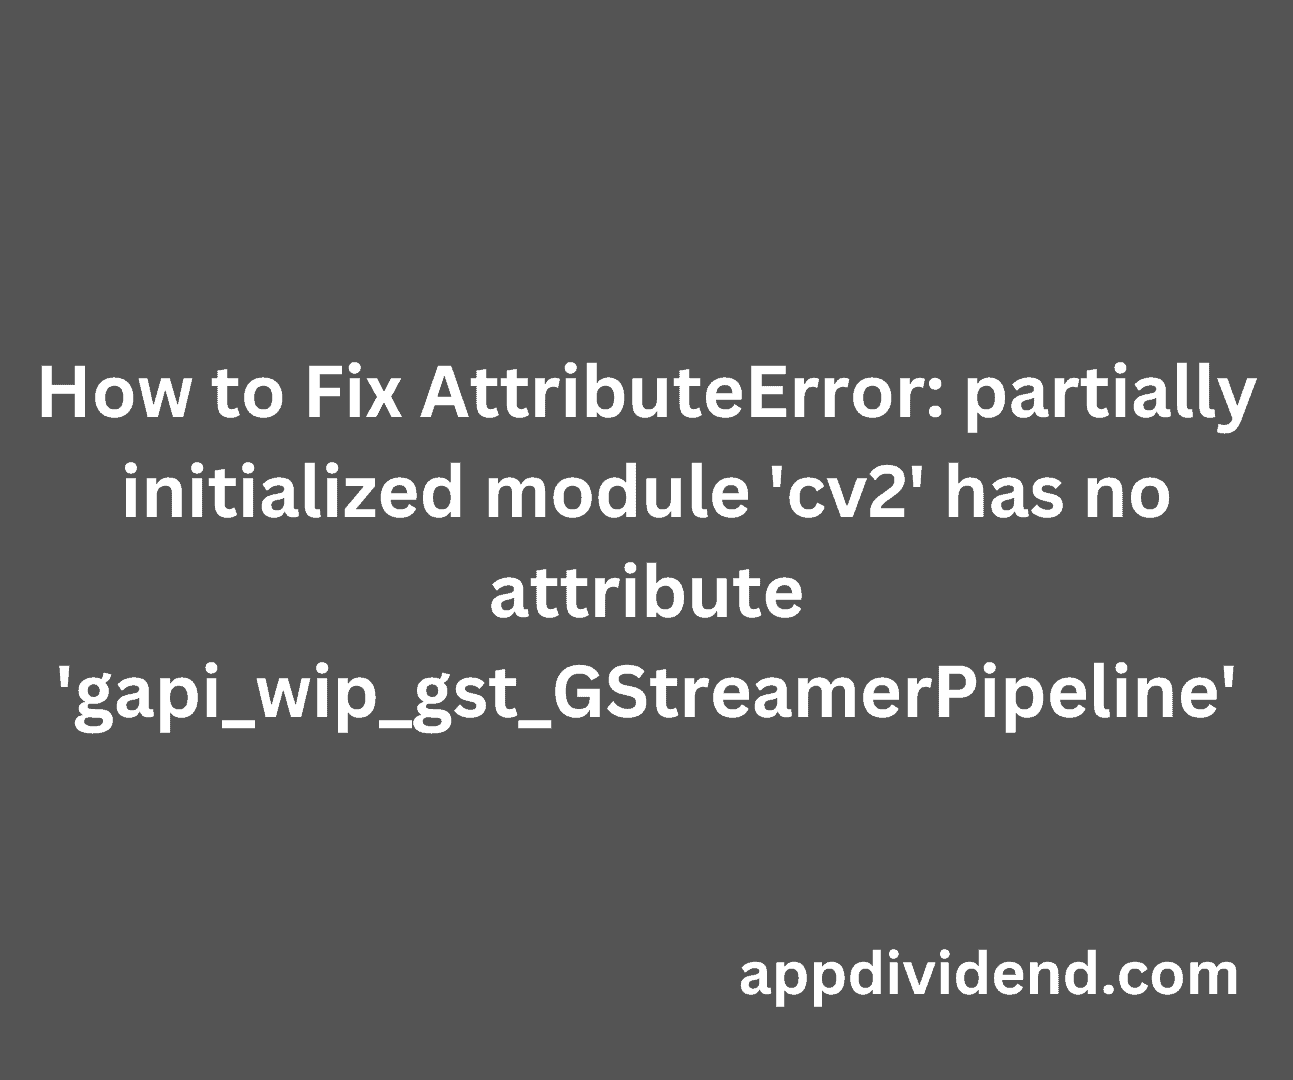 How to Fix AttributeError partially initialized module 'cv2' has no